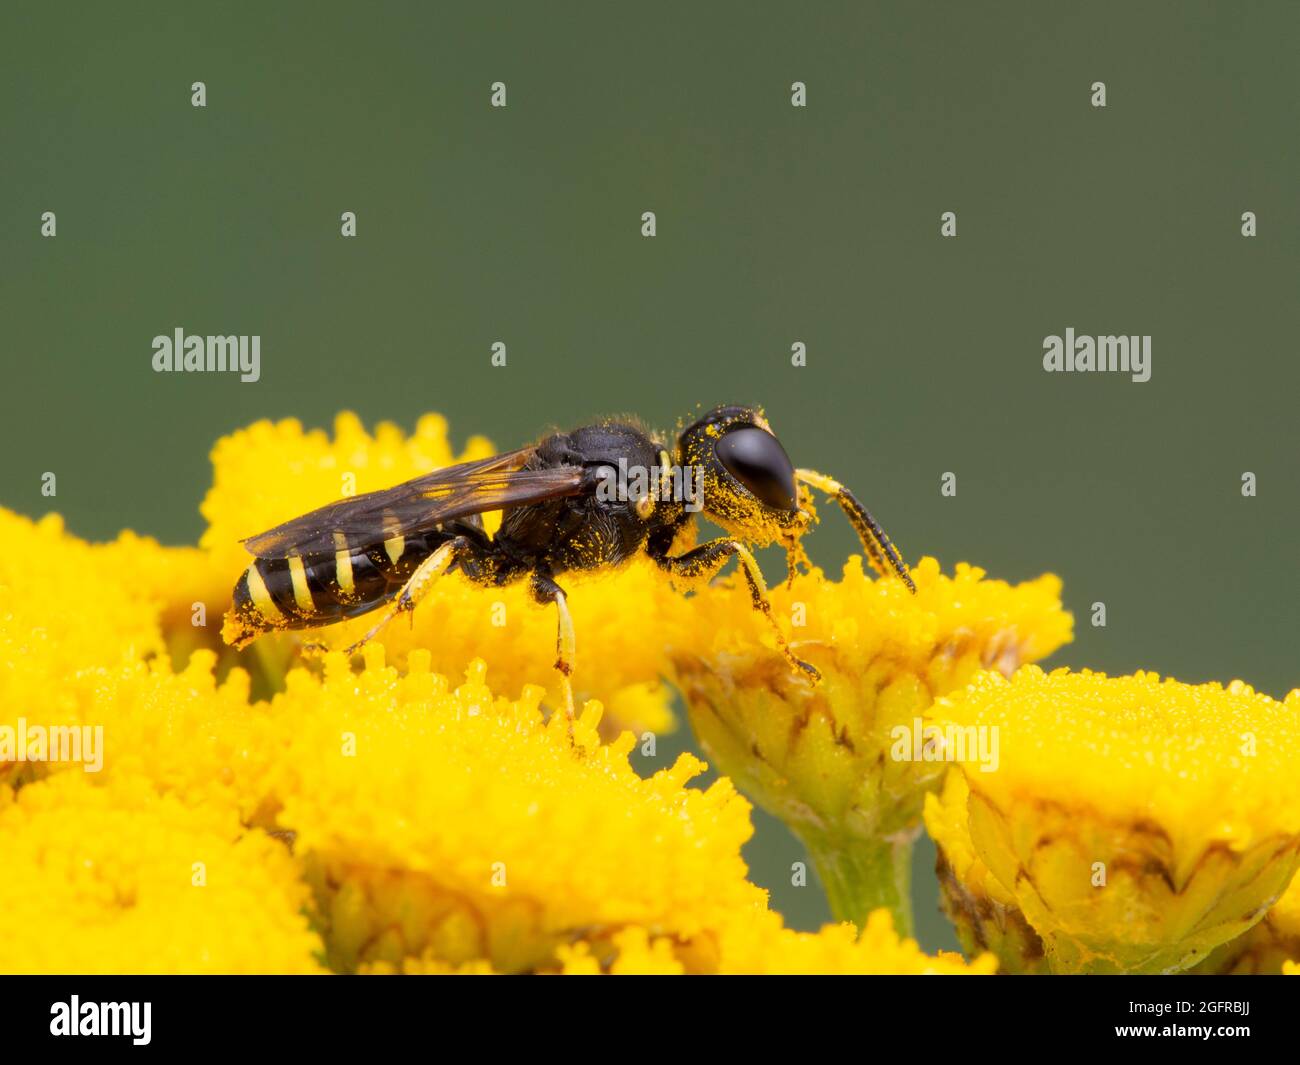 cute, tiny squarehead wasp, Ectemnius species, dusted with pollen, climbing on the bright yellow flower of a common tansy (Tanacetum vulgare) Stock Photo